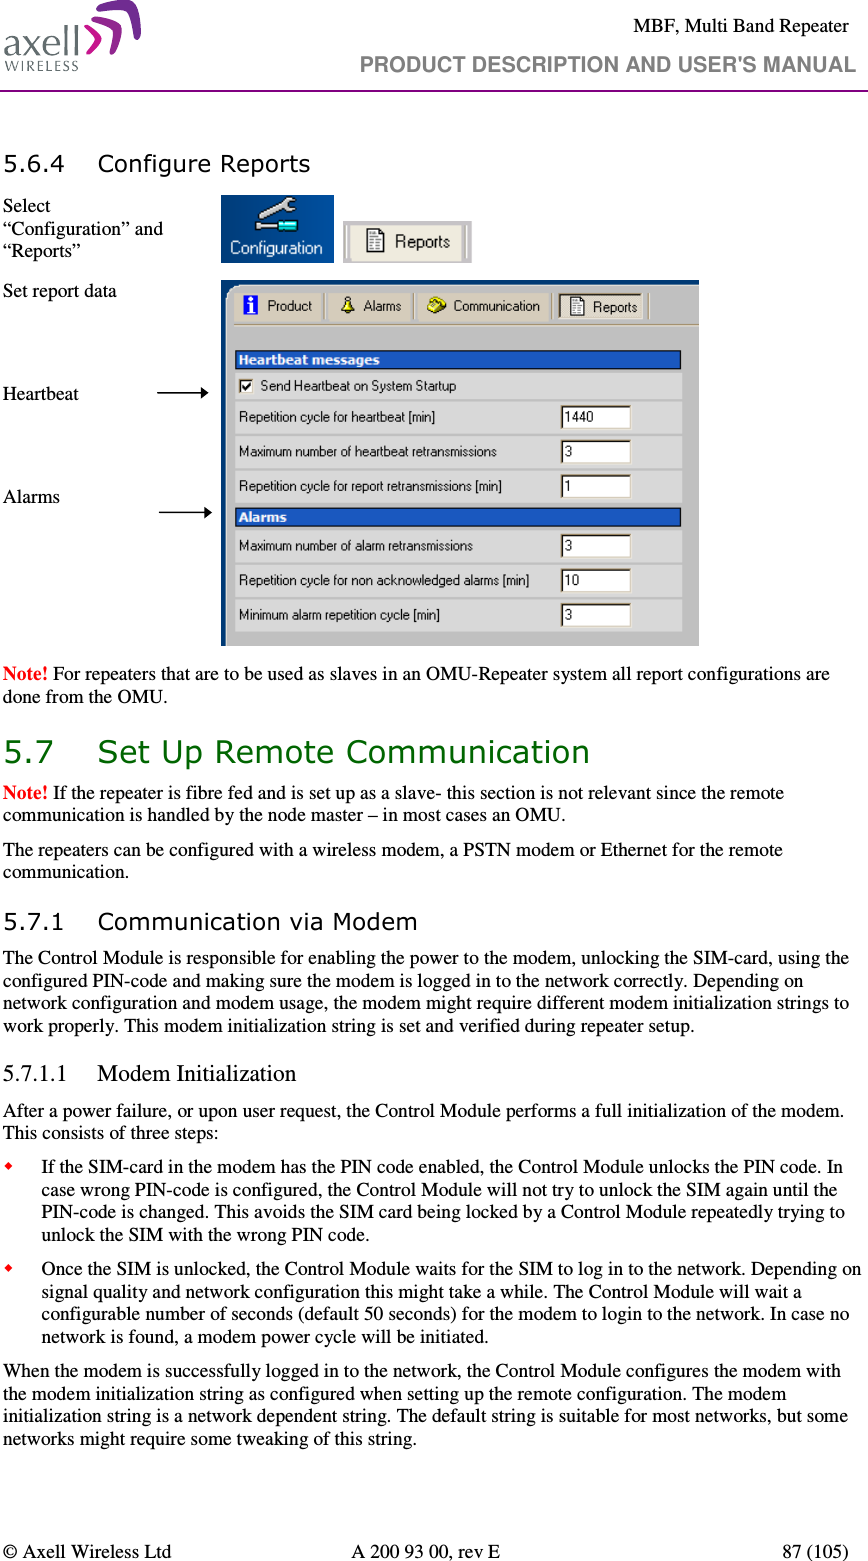     MBF, Multi Band Repeater                                     PRODUCT DESCRIPTION AND USER&apos;S MANUAL   © Axell Wireless Ltd  A 200 93 00, rev E  87 (105)  5.6.4 Configure Reports Select “Configuration” and “Reports”        Set report data   Heartbeat   Alarms   Note! For repeaters that are to be used as slaves in an OMU-Repeater system all report configurations are done from the OMU.  5.7 Set Up Remote Communication Note! If the repeater is fibre fed and is set up as a slave- this section is not relevant since the remote communication is handled by the node master – in most cases an OMU. The repeaters can be configured with a wireless modem, a PSTN modem or Ethernet for the remote communication.  5.7.1 Communication via Modem The Control Module is responsible for enabling the power to the modem, unlocking the SIM-card, using the configured PIN-code and making sure the modem is logged in to the network correctly. Depending on network configuration and modem usage, the modem might require different modem initialization strings to work properly. This modem initialization string is set and verified during repeater setup.  5.7.1.1 Modem Initialization After a power failure, or upon user request, the Control Module performs a full initialization of the modem. This consists of three steps:  If the SIM-card in the modem has the PIN code enabled, the Control Module unlocks the PIN code. In case wrong PIN-code is configured, the Control Module will not try to unlock the SIM again until the PIN-code is changed. This avoids the SIM card being locked by a Control Module repeatedly trying to unlock the SIM with the wrong PIN code.  Once the SIM is unlocked, the Control Module waits for the SIM to log in to the network. Depending on signal quality and network configuration this might take a while. The Control Module will wait a configurable number of seconds (default 50 seconds) for the modem to login to the network. In case no network is found, a modem power cycle will be initiated. When the modem is successfully logged in to the network, the Control Module configures the modem with the modem initialization string as configured when setting up the remote configuration. The modem initialization string is a network dependent string. The default string is suitable for most networks, but some networks might require some tweaking of this string. 